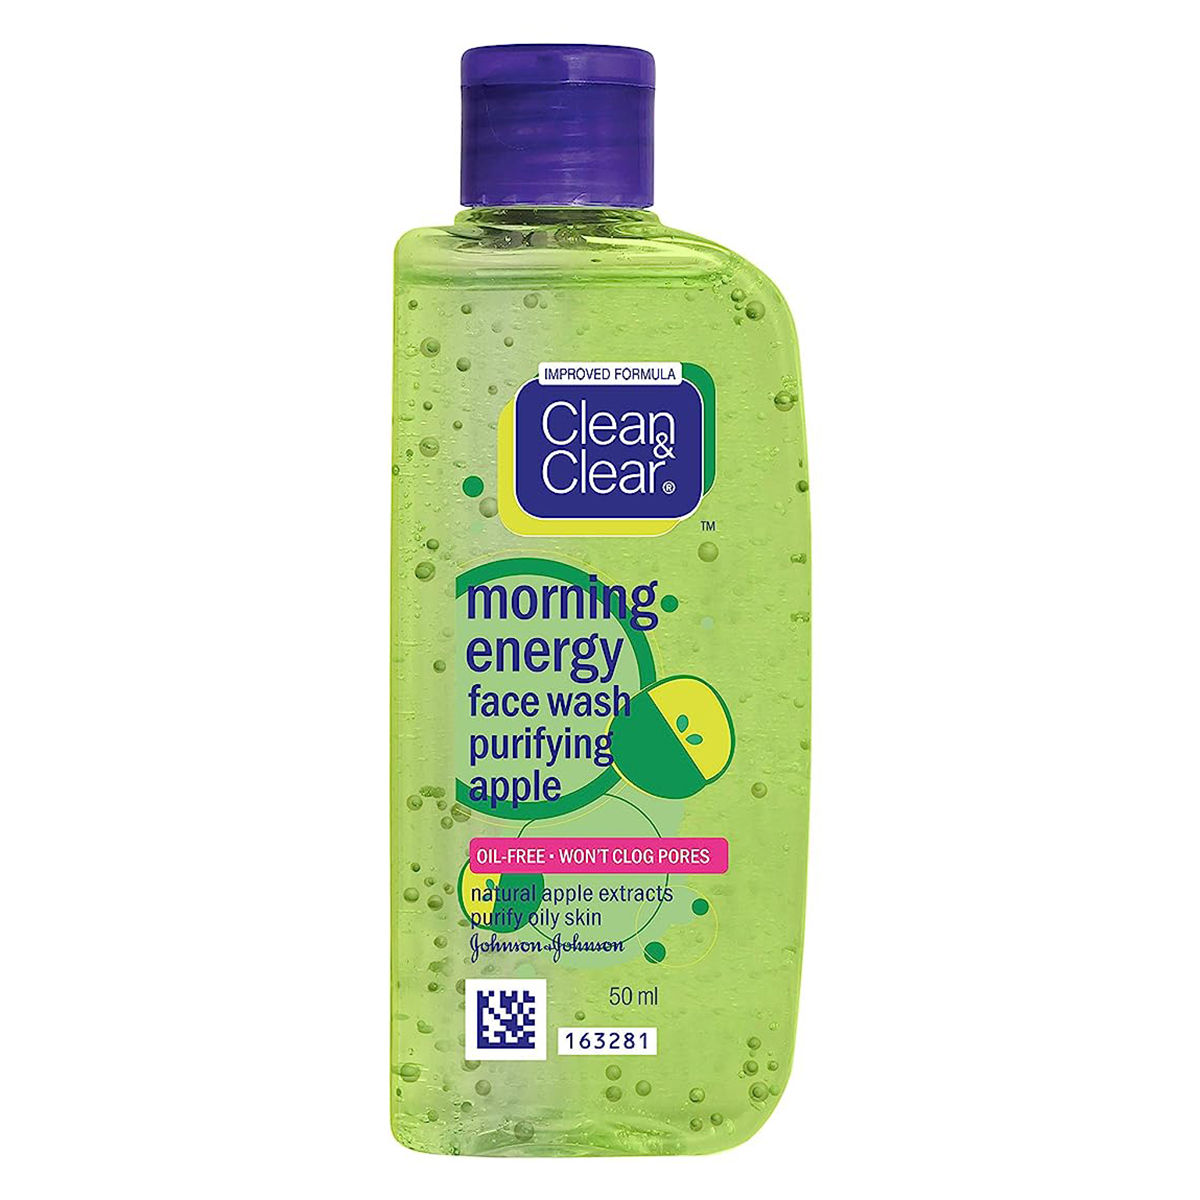 Buy Clean & Clear Morning Energy Purifying Apple Face Wash 50 ml | Natural Apple Extract | Purifies Oily Skin | Gives Clean, Clear & Beautiful Skin Online